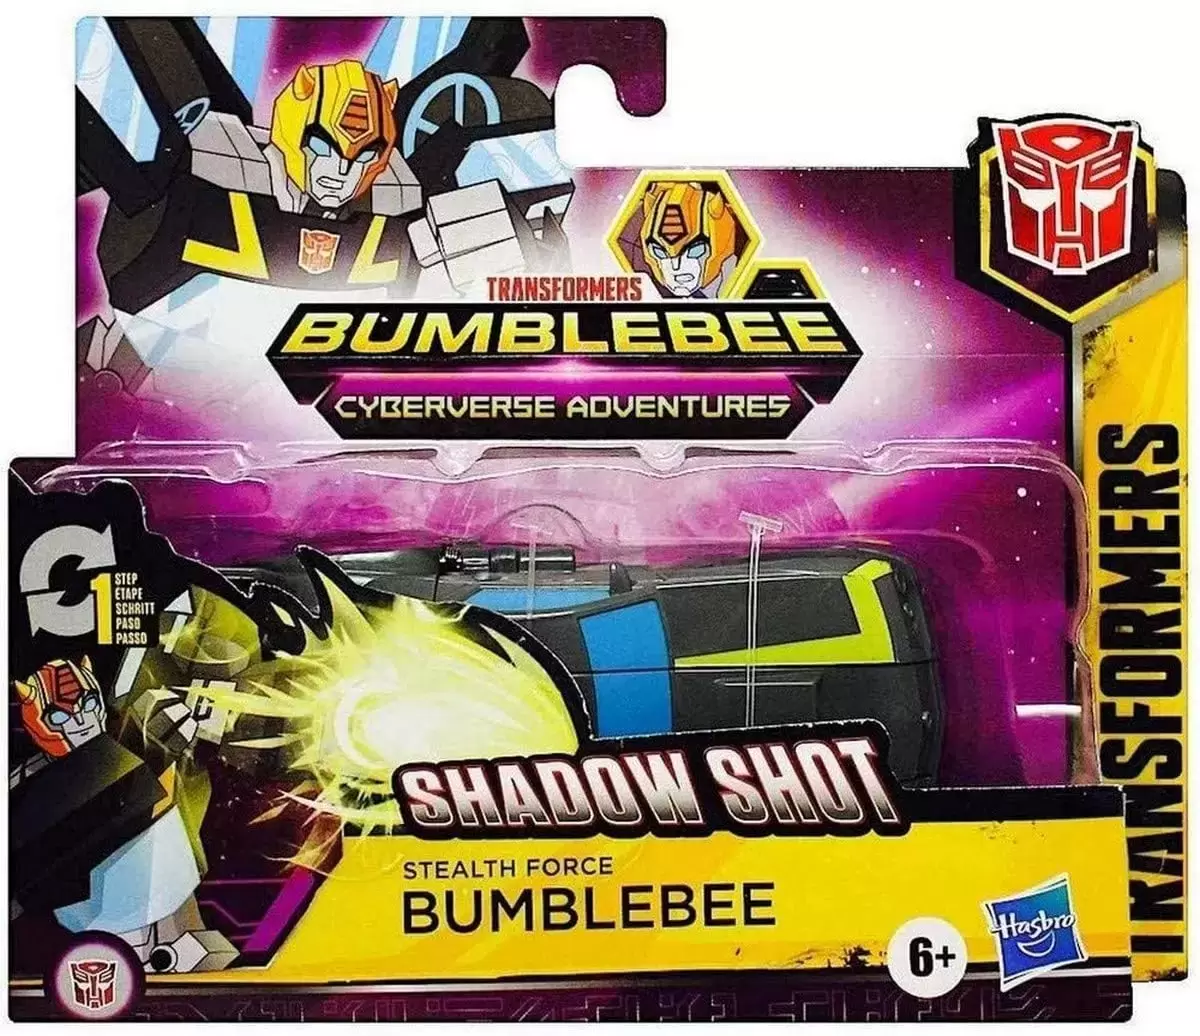 Transformers Cyberverse - Bumblebee Stealth Force